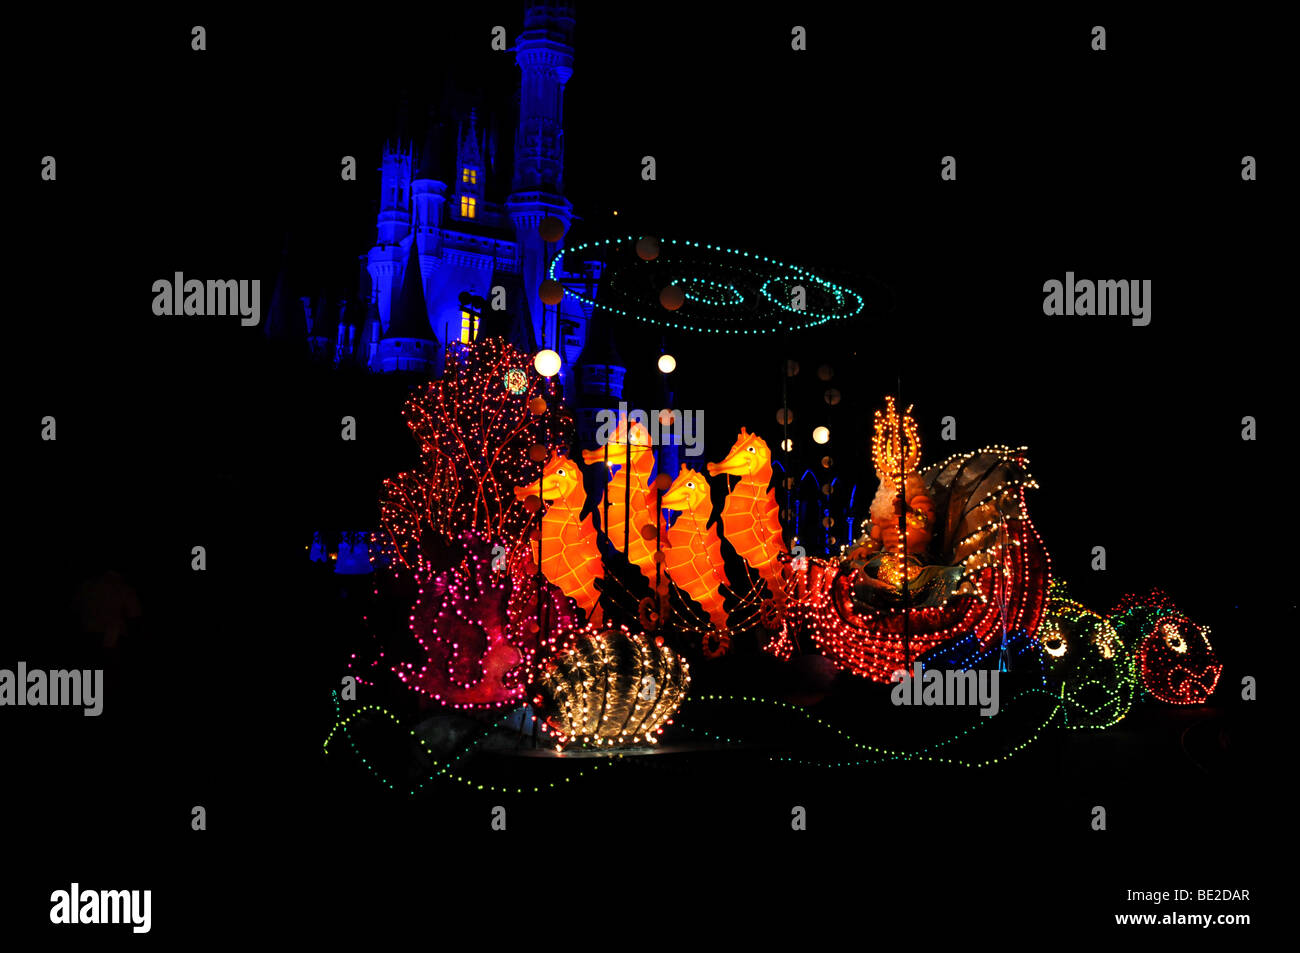 PARADE OF LIGHTS AT WALT DISNEY WORLD - APRIL 11: Little Mermaid float at the Magic Kingdom Parade of Lights. Disney World in Or Stock Photo